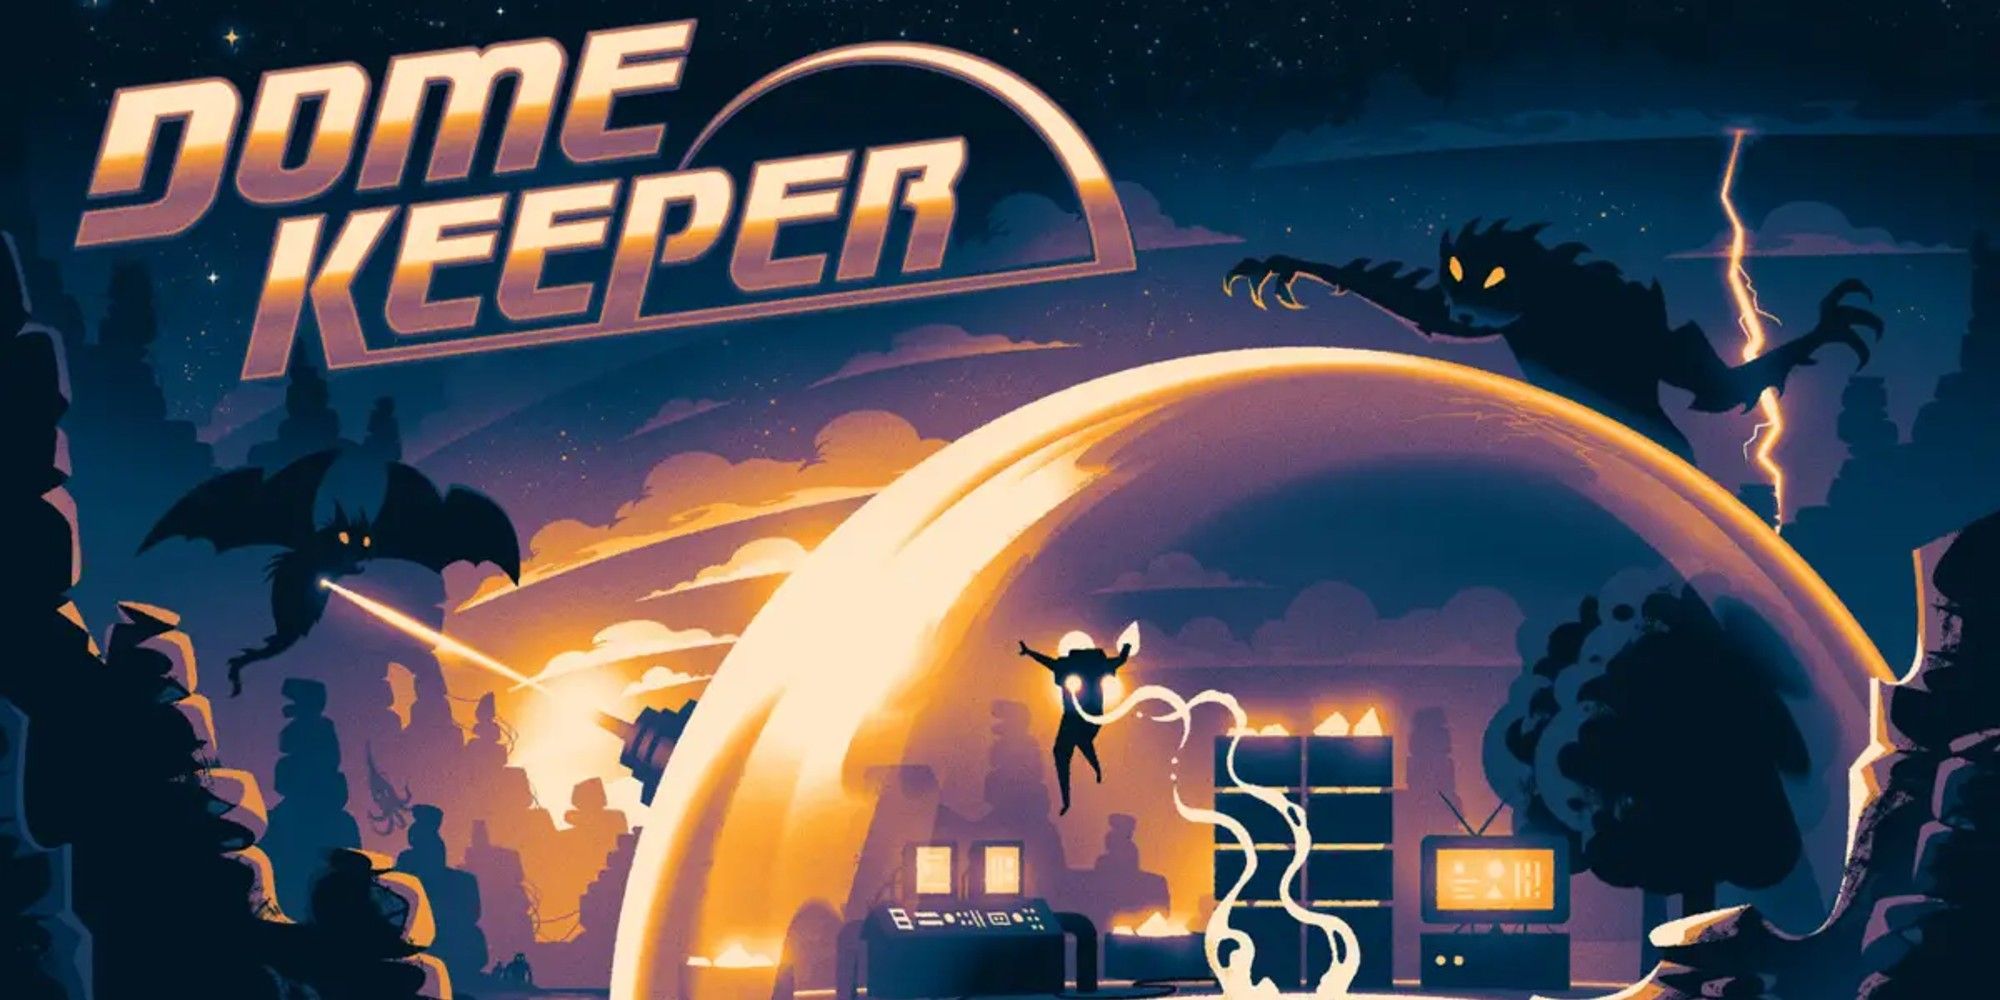 Dome Keeper Cover, a dome under attack by monsters and the logo for the game in the night sky